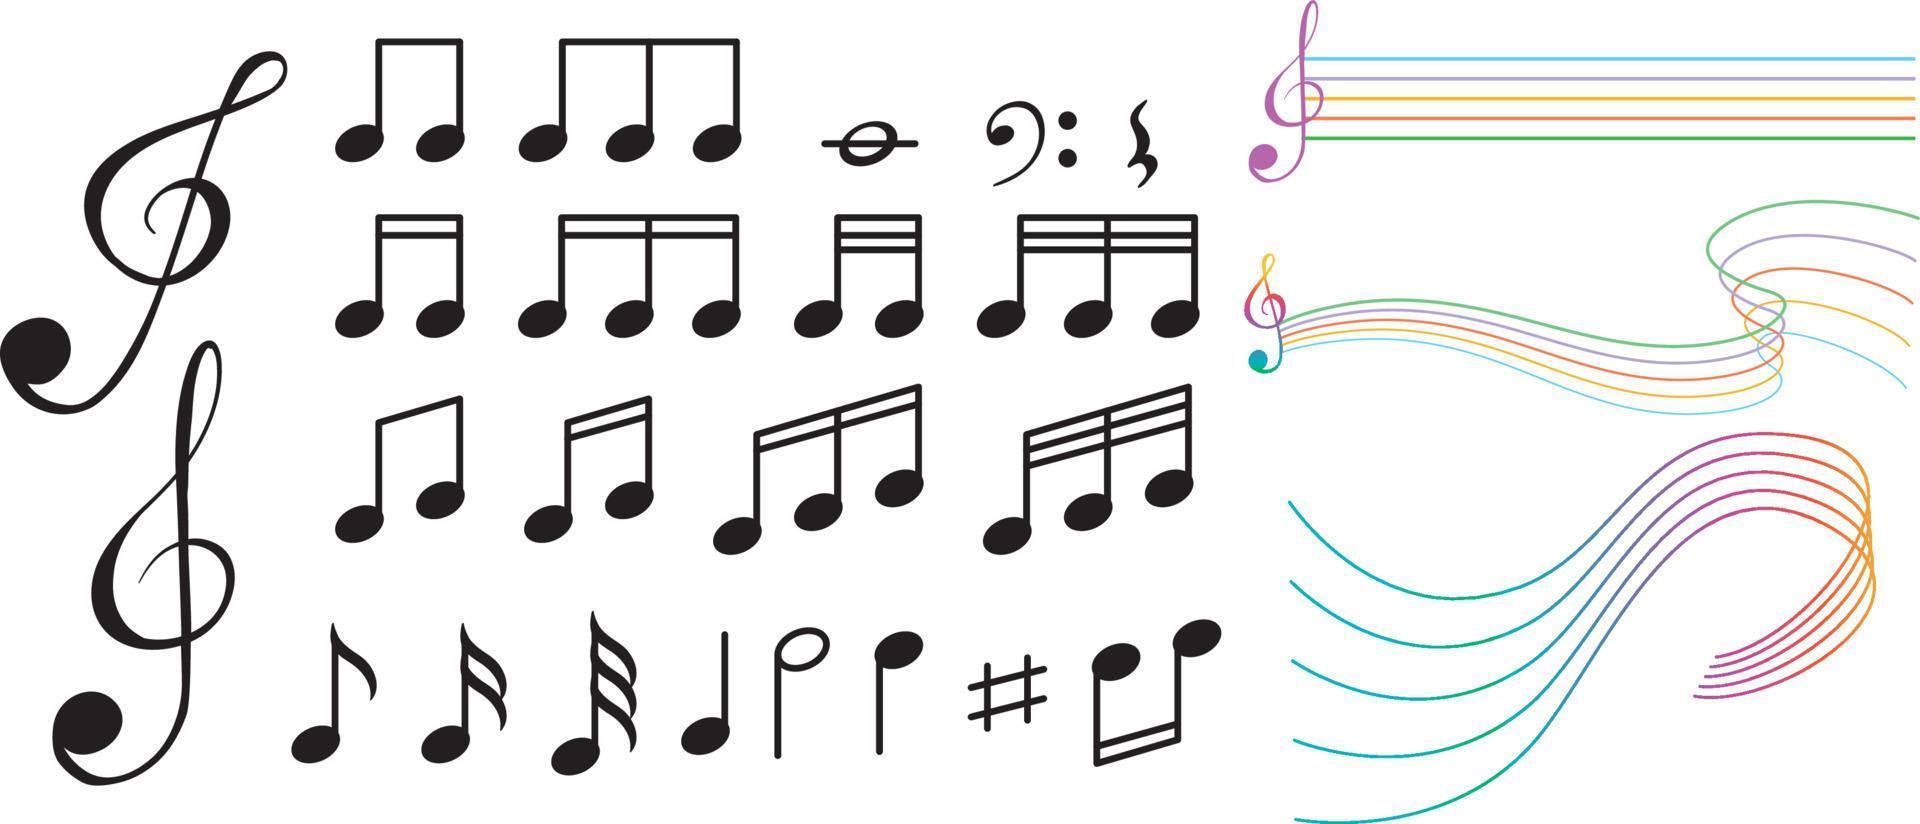 Musical symbols with wave lines on white background vector